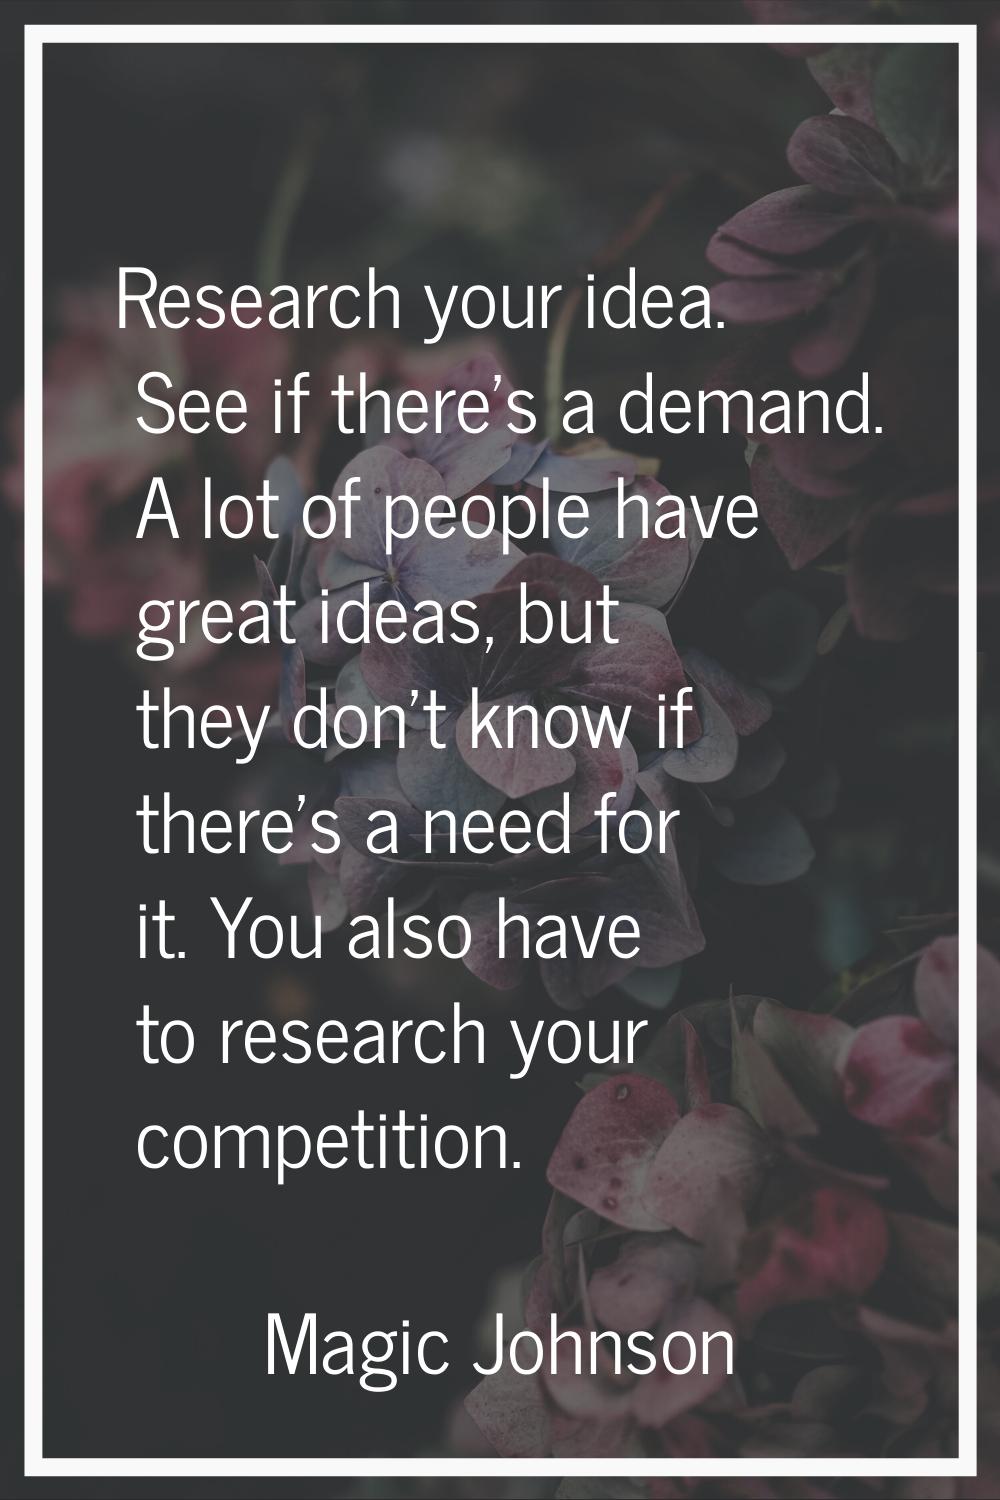 Research your idea. See if there's a demand. A lot of people have great ideas, but they don't know 